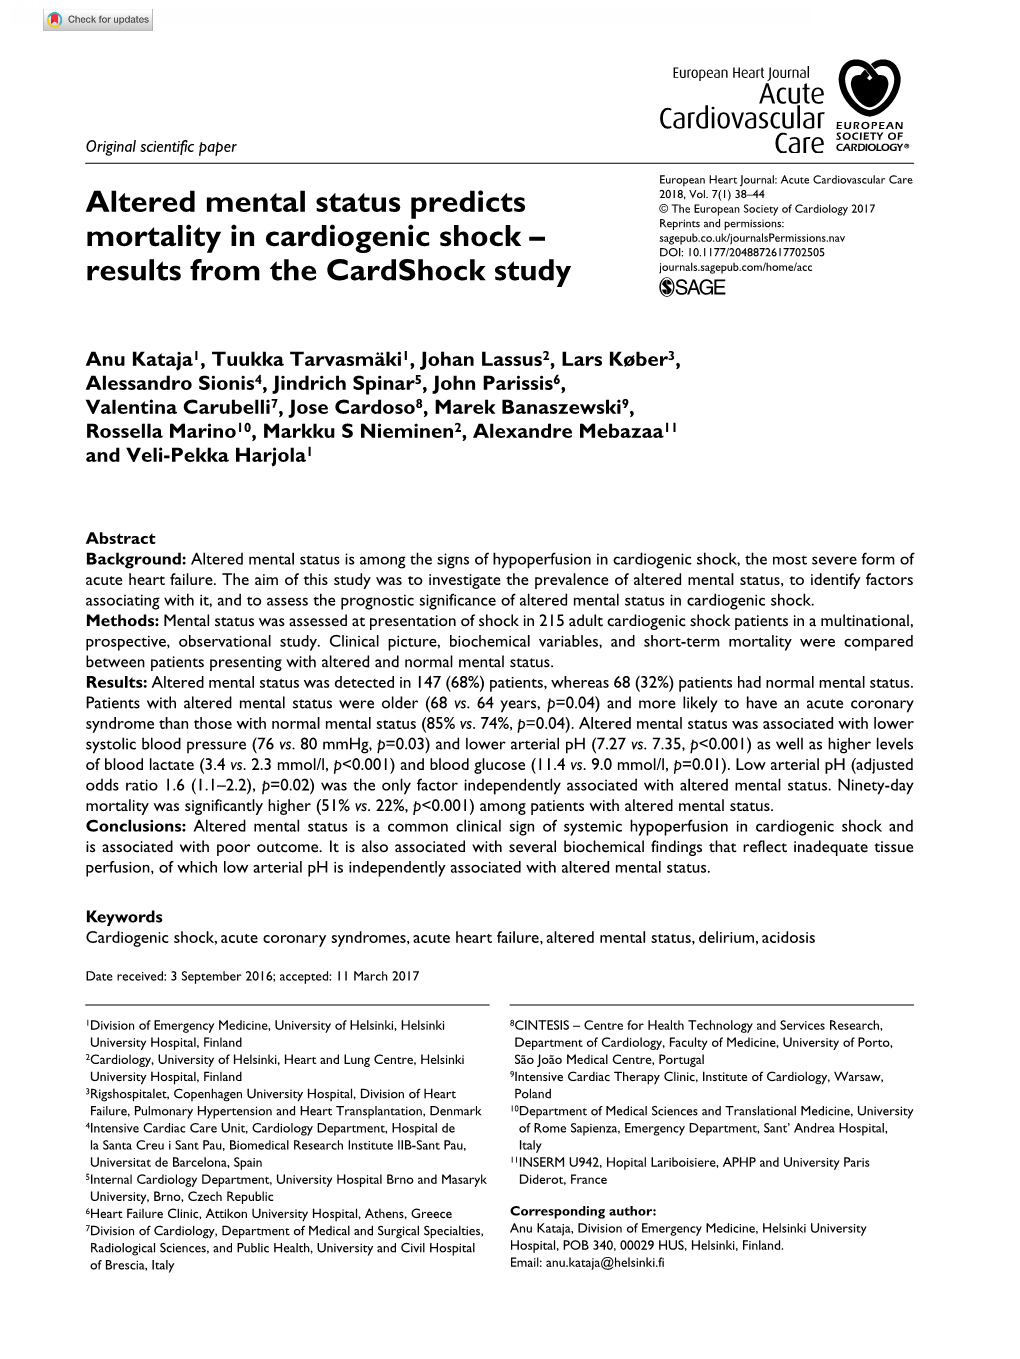 Altered Mental Status Predicts Mortality in Cardiogenic Shock – Results From